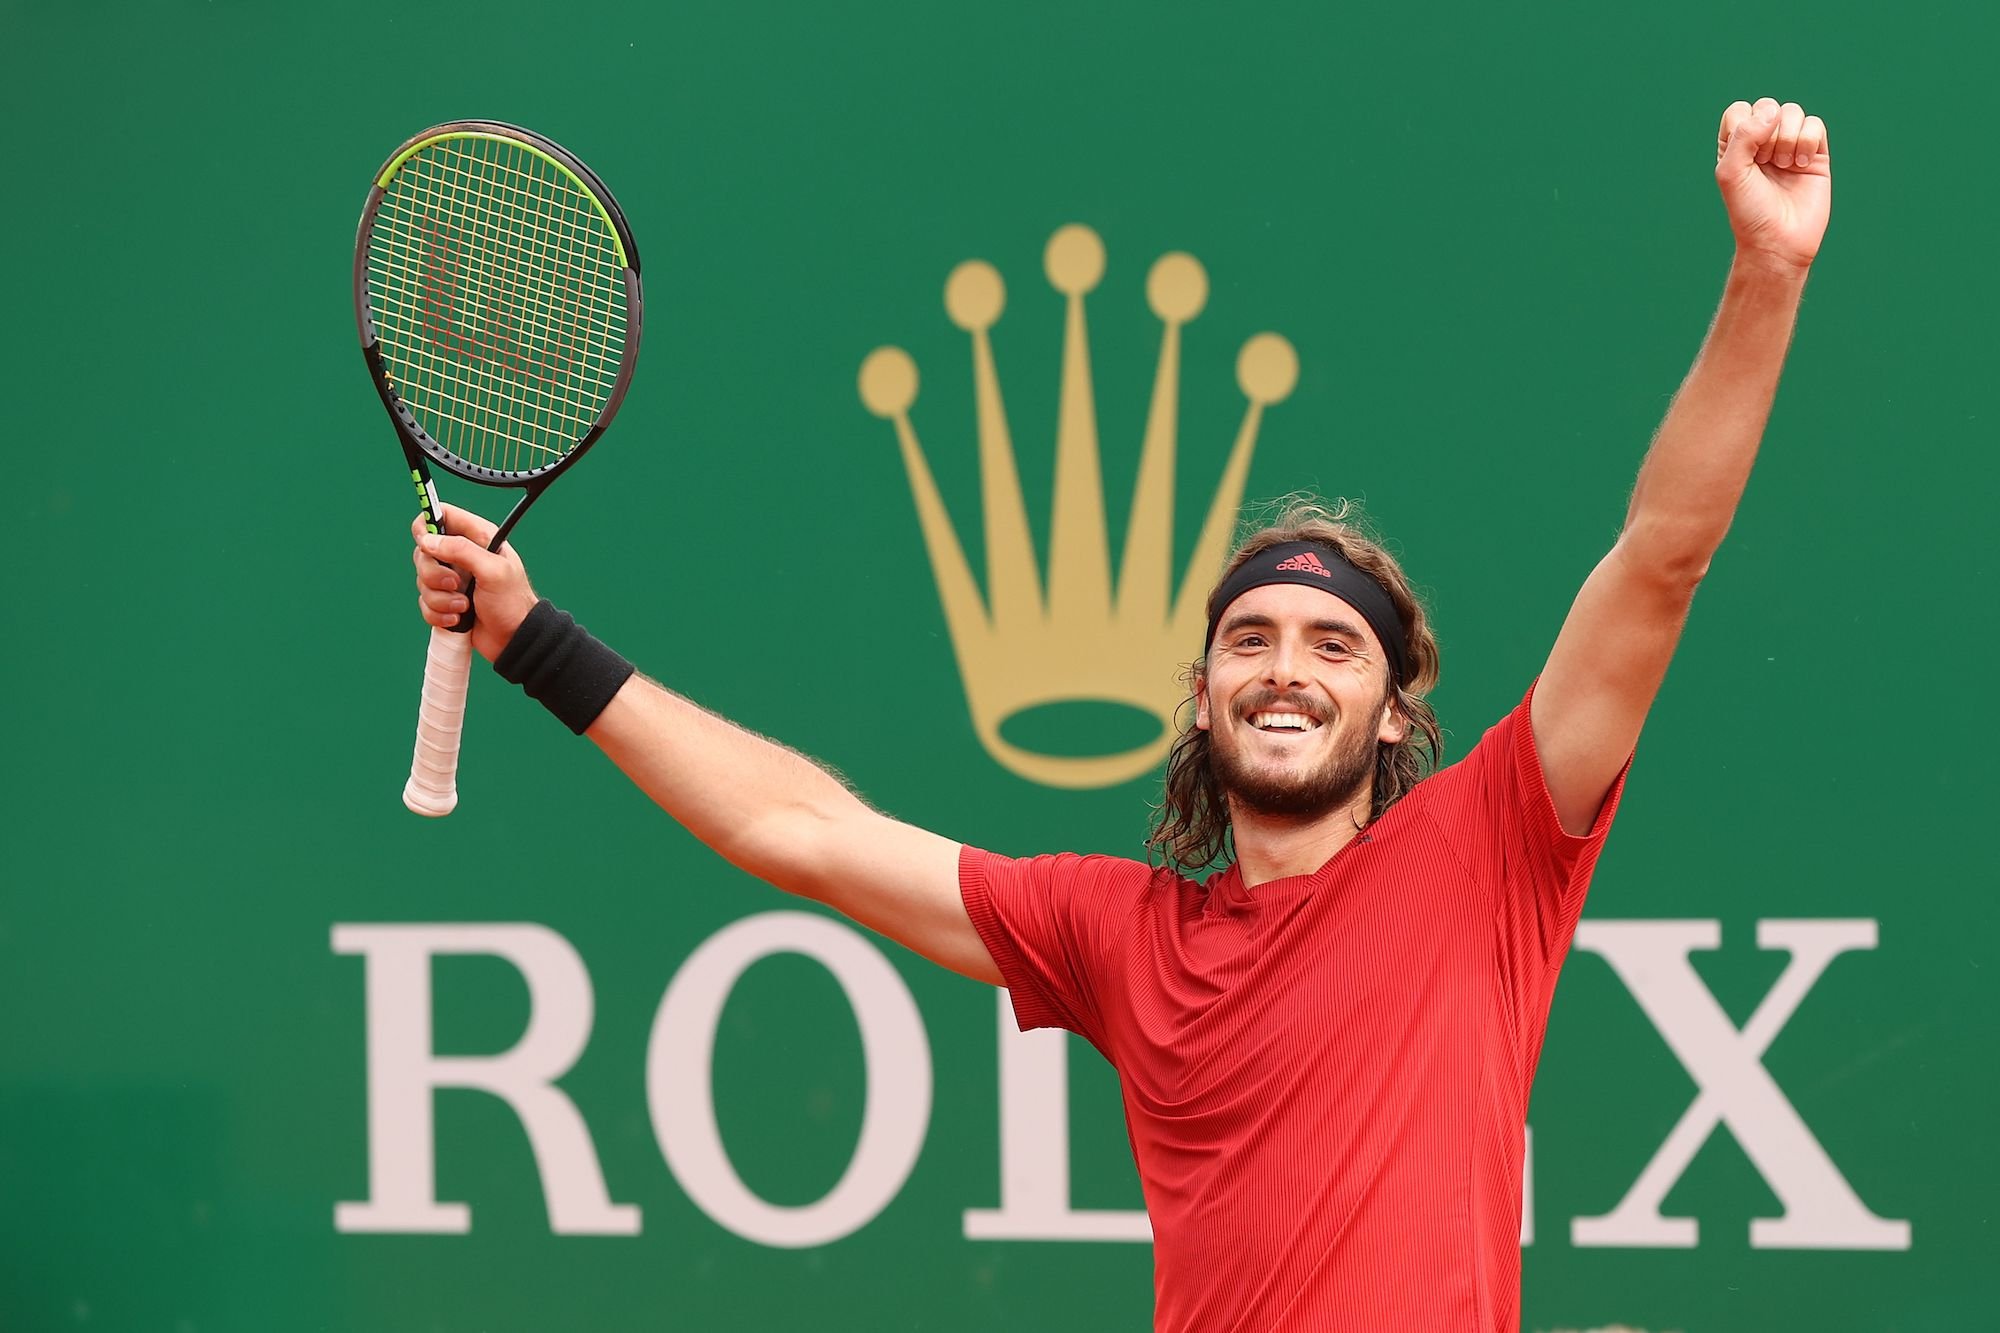 Stefanos Tsitsipas smiling, holding his arms up in a victorious pose